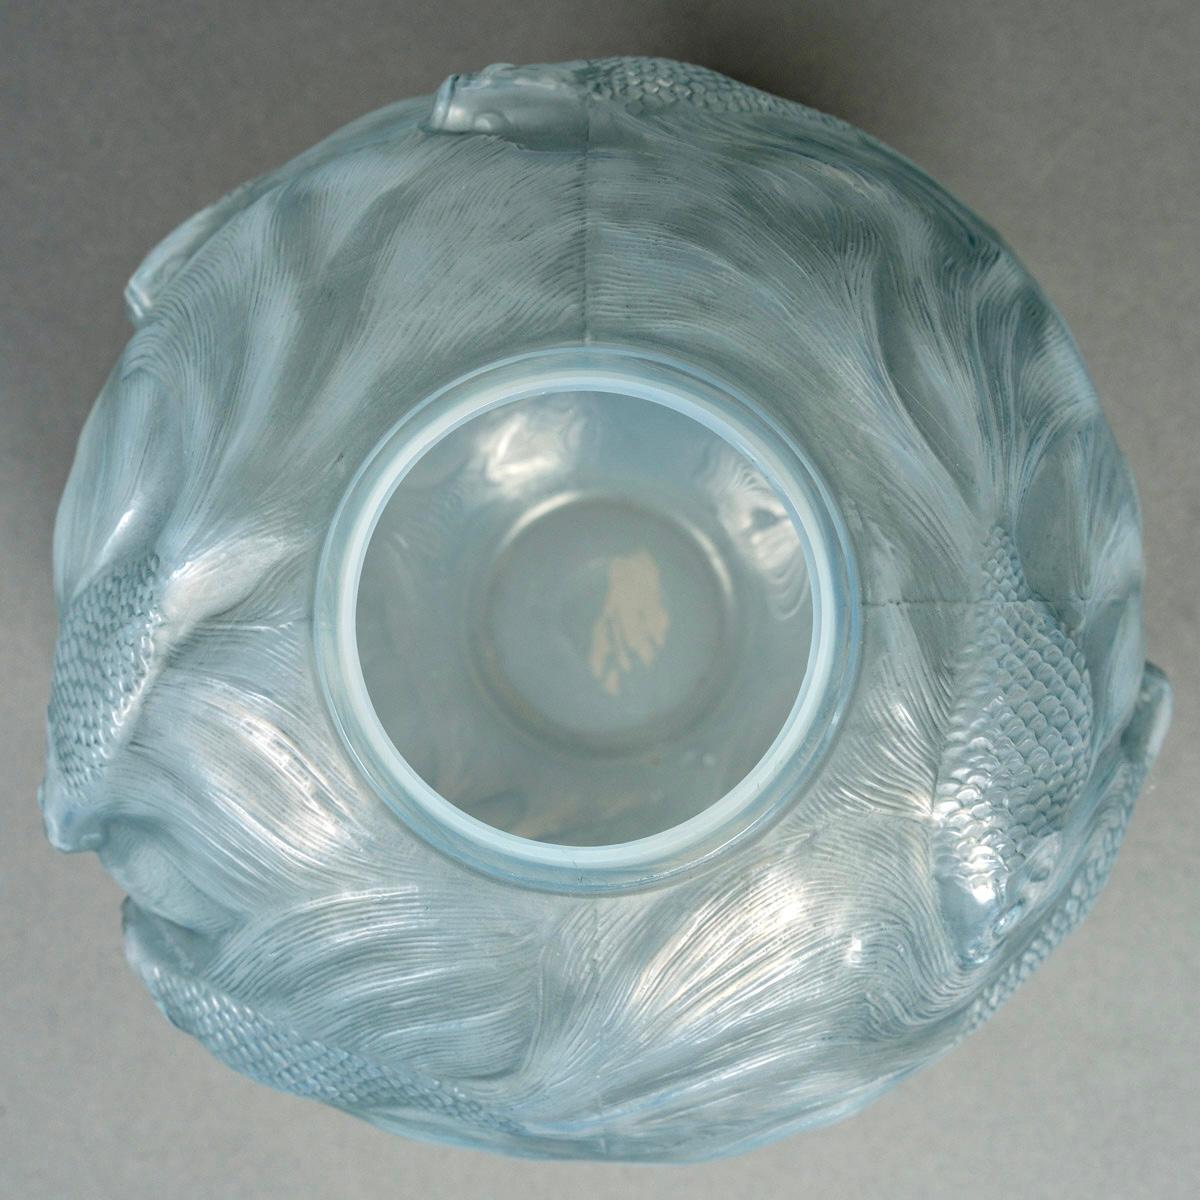 French 1924 Rene Lalique Vase Formose Cased Opalescent Glass with Blue Patina For Sale